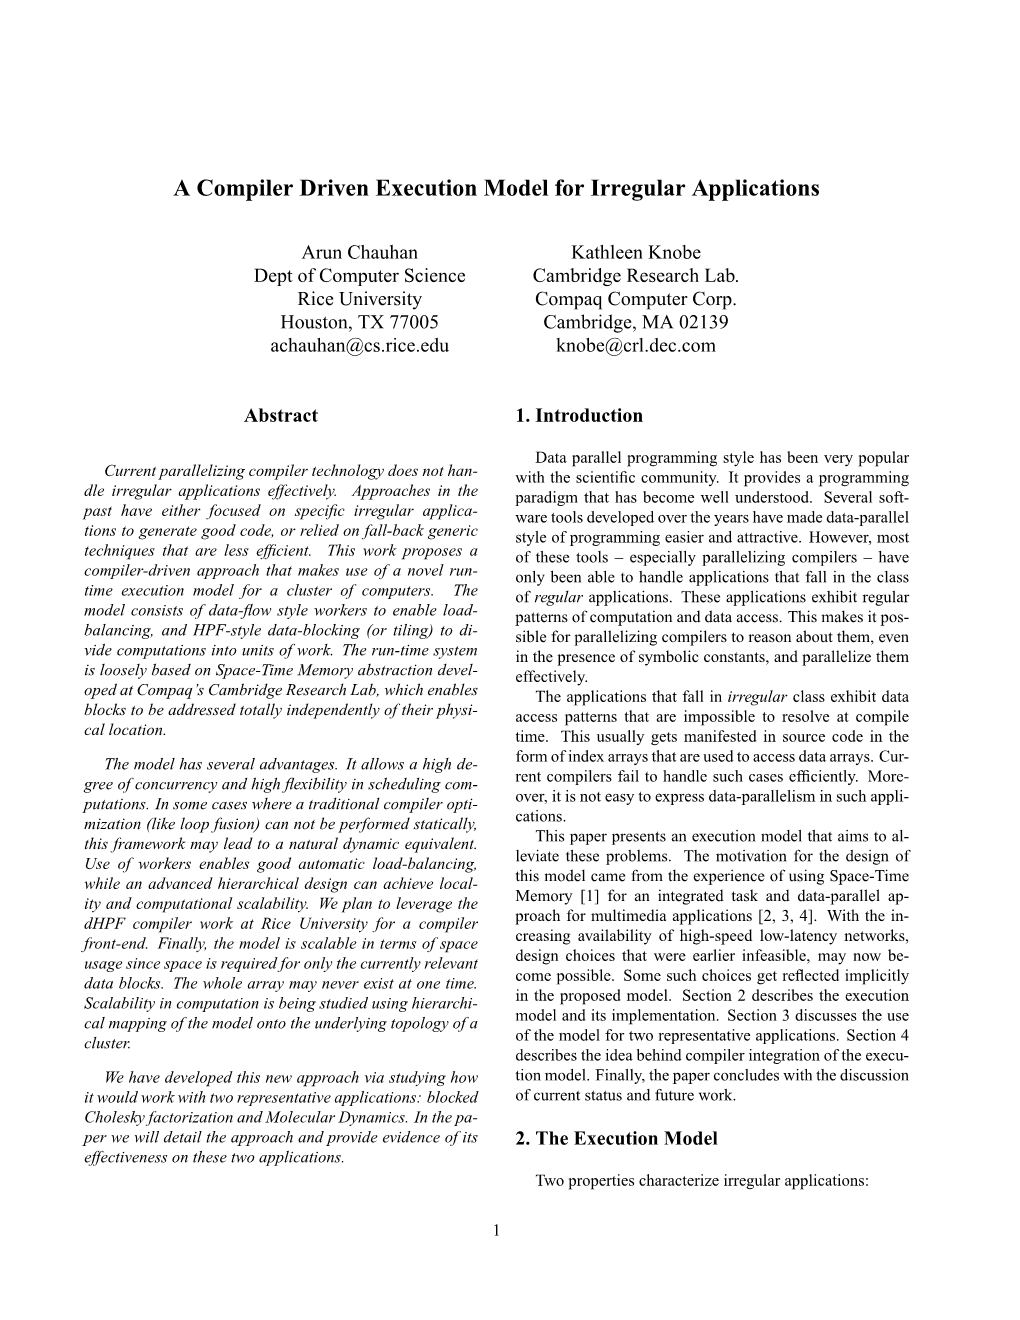 A Compiler Driven Execution Model for Irregular Applications